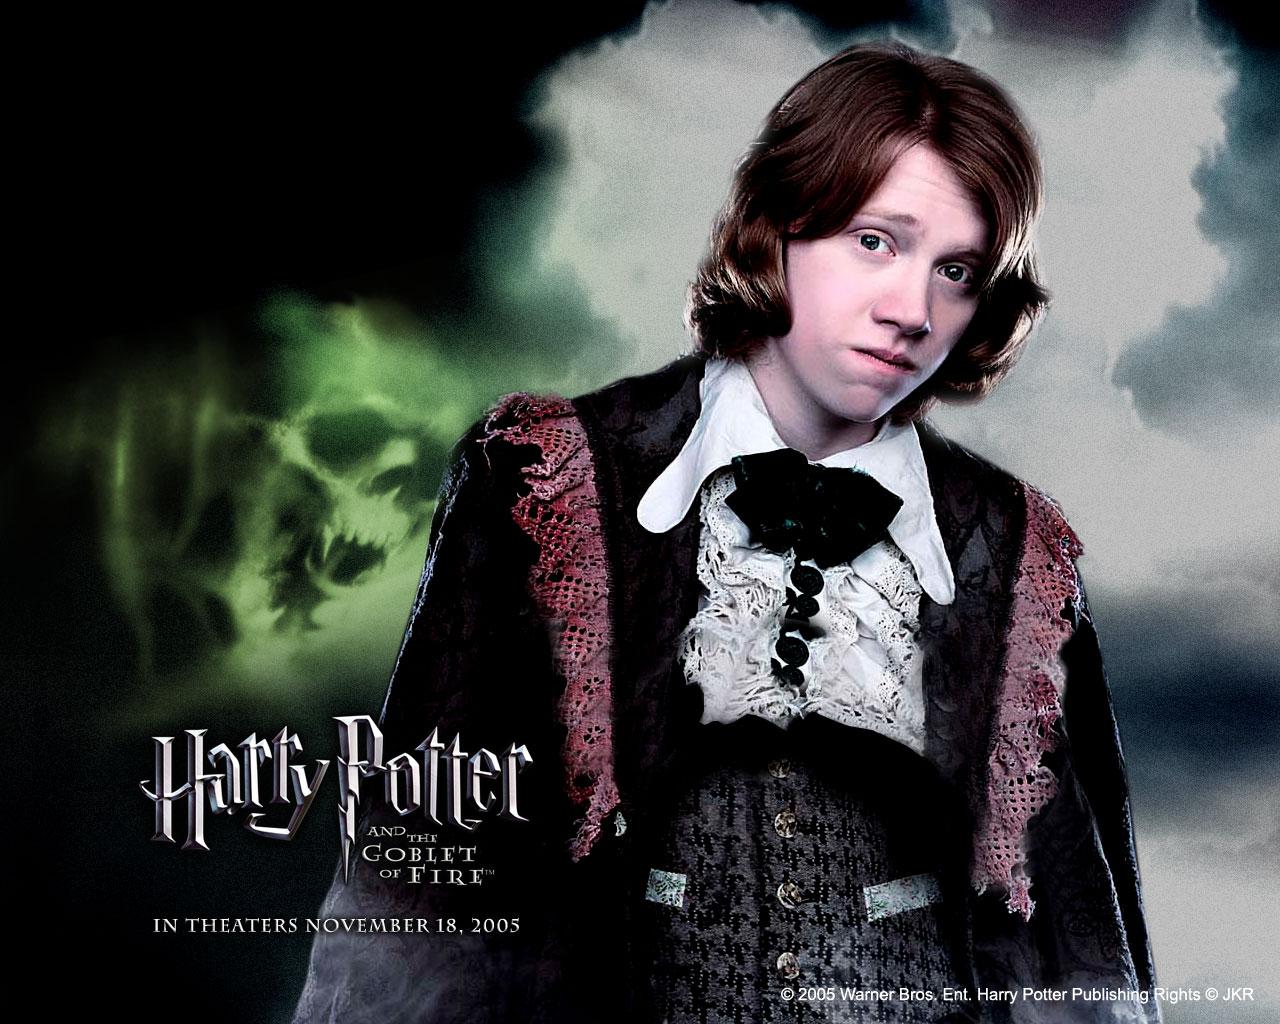 Rupert Grint Grint in Harry Potter and the Goblet of Fire